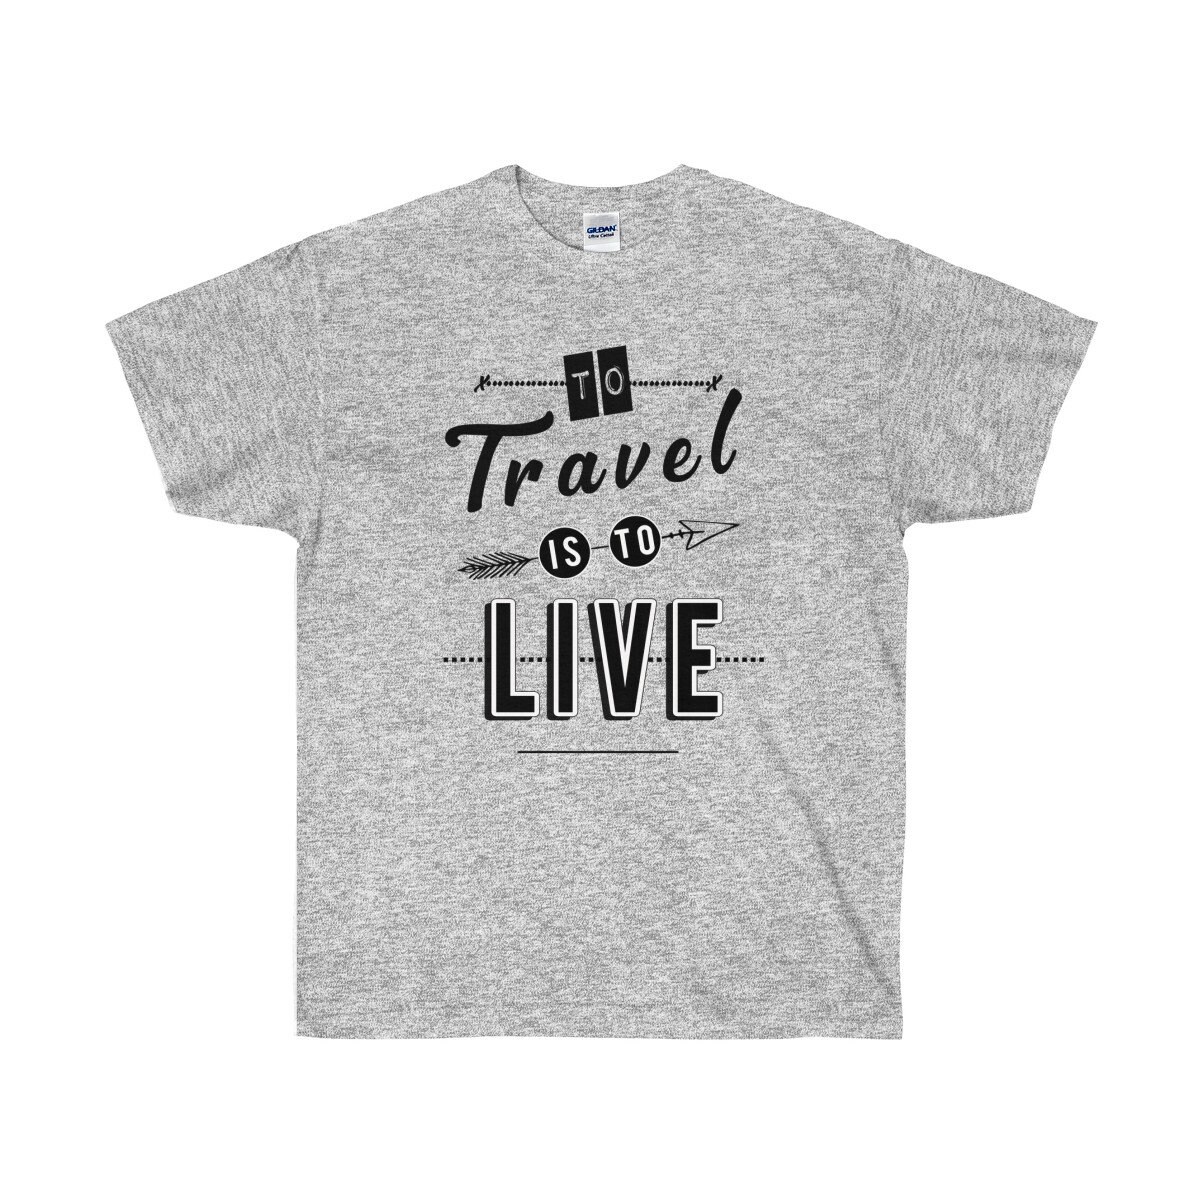 To Travel is to Live Travel Tshirt Explore Shirt Traveling | Etsy